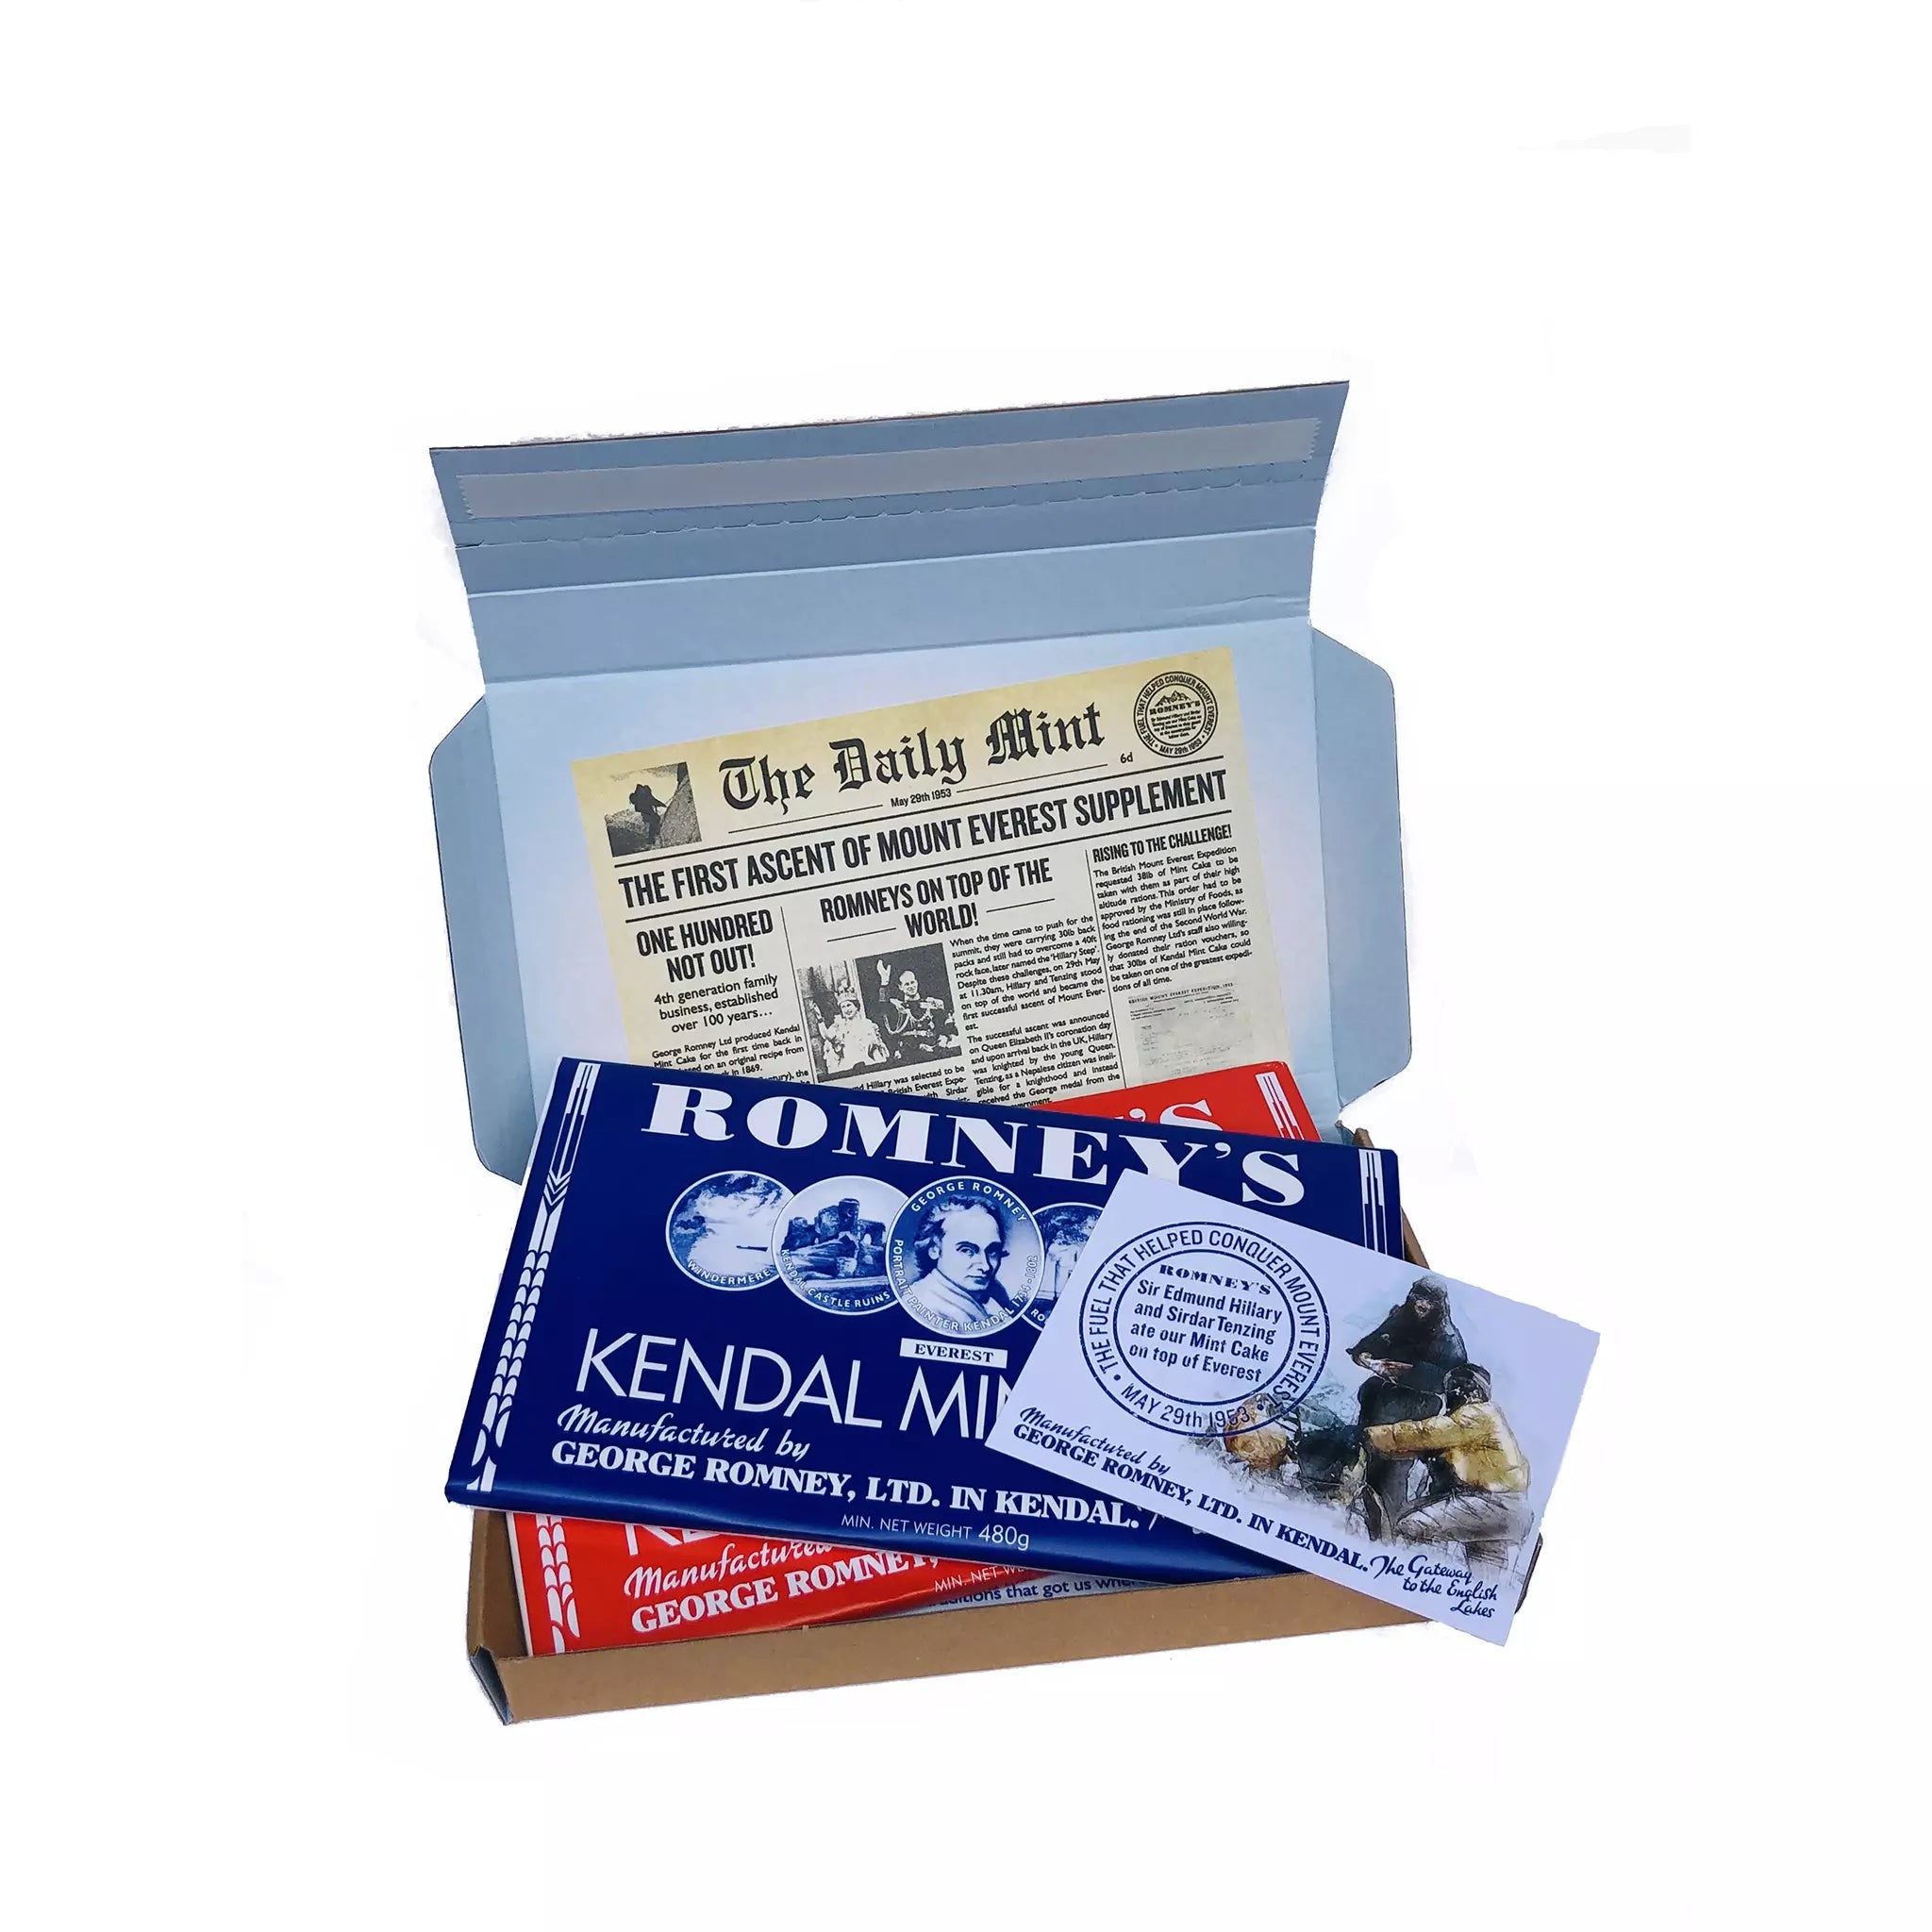 An open rectangular cardboard box containing a variety of Romney's confectionery products such as: A 480g white kendal mint cake bar and a 480g brown kendal mint cake bar